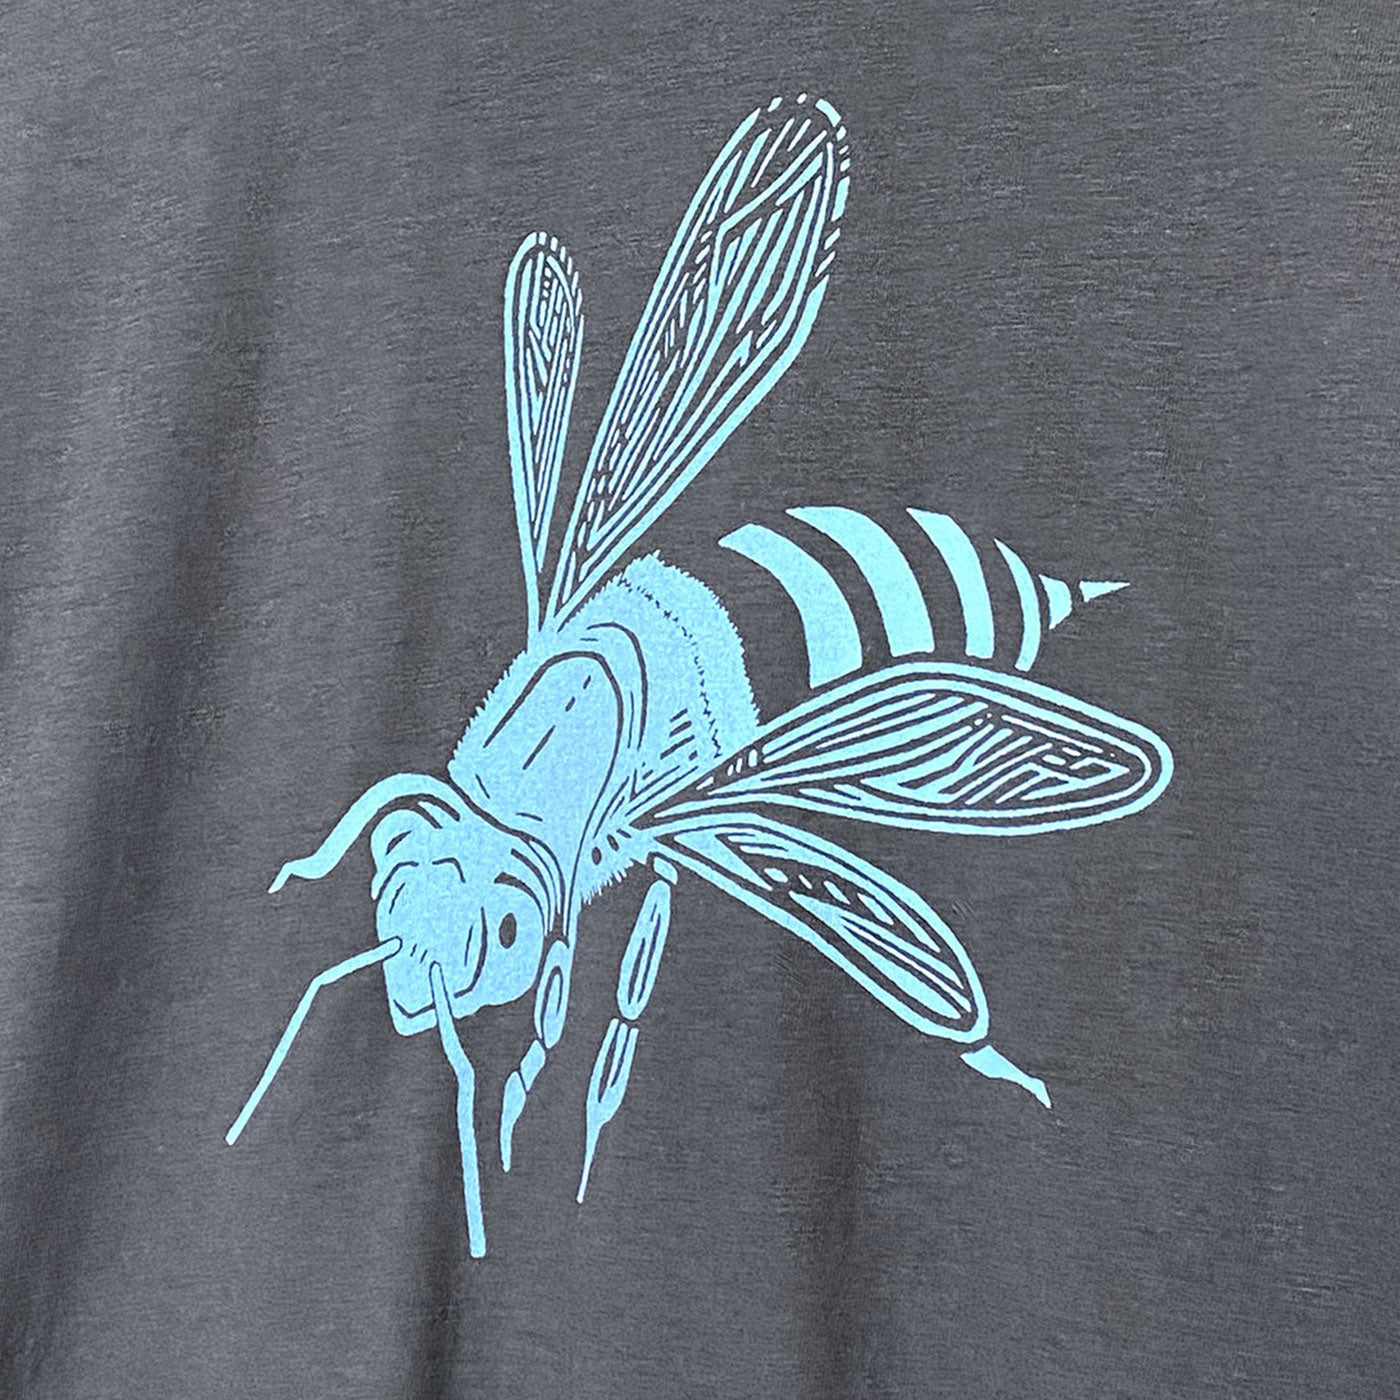 Detail of a light blue bee drawing screen printed on the front of a grey shirt